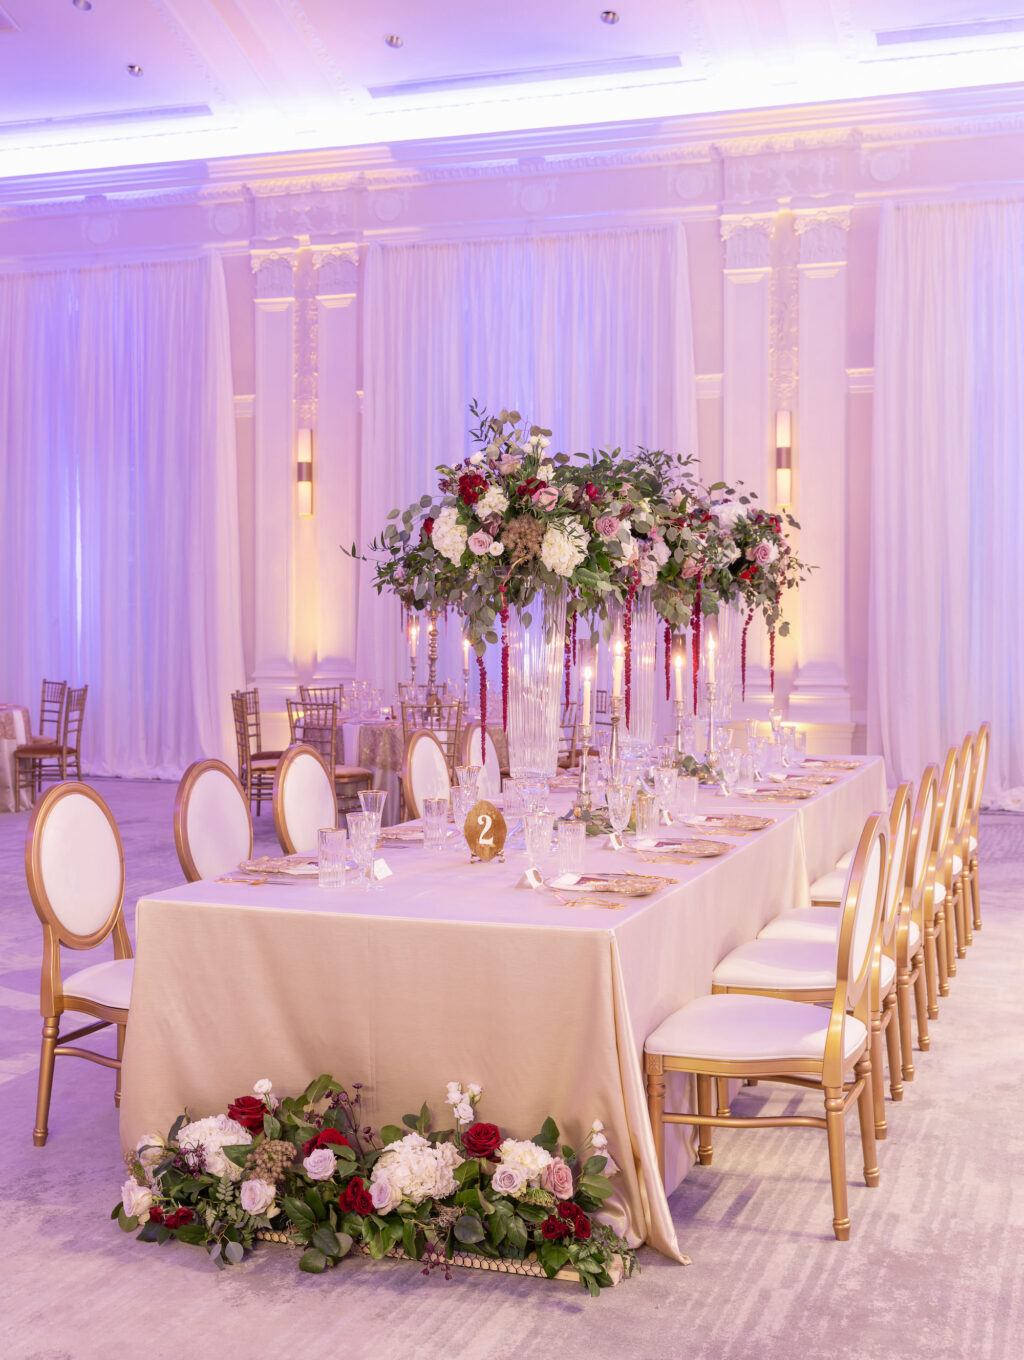 Elegant Royal Glam Gatsby Wedding Reception Decor, Purple Uplighting, Long Table with Champagne Linen, Gold and Ivory Dining Chairs, Tall Glass Vases with Lush Greenery, White, Mauve, Burgundy and Blush Pink Roses with Red Hanging Amaranthus Flower Centerpieces | Tampa Bay Wedding Planner and Designer John Campbell Weddings | St. Pete Wedding Rentals Kate Ryan Event Rentals